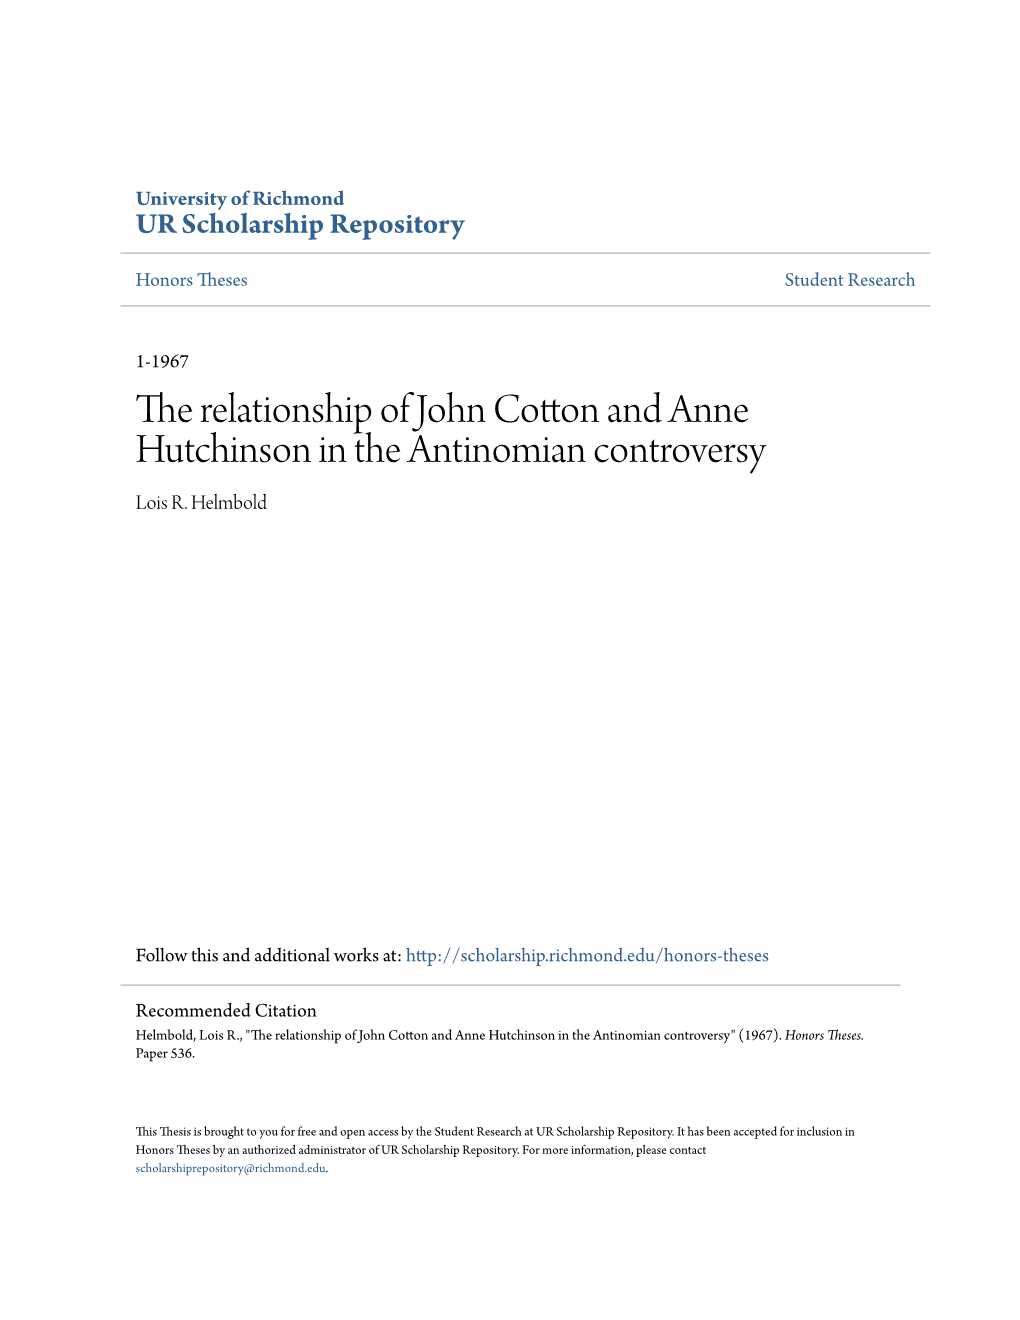 The Relationship of John Cotton and Anne Hutchinson in the Antinomian Controversy